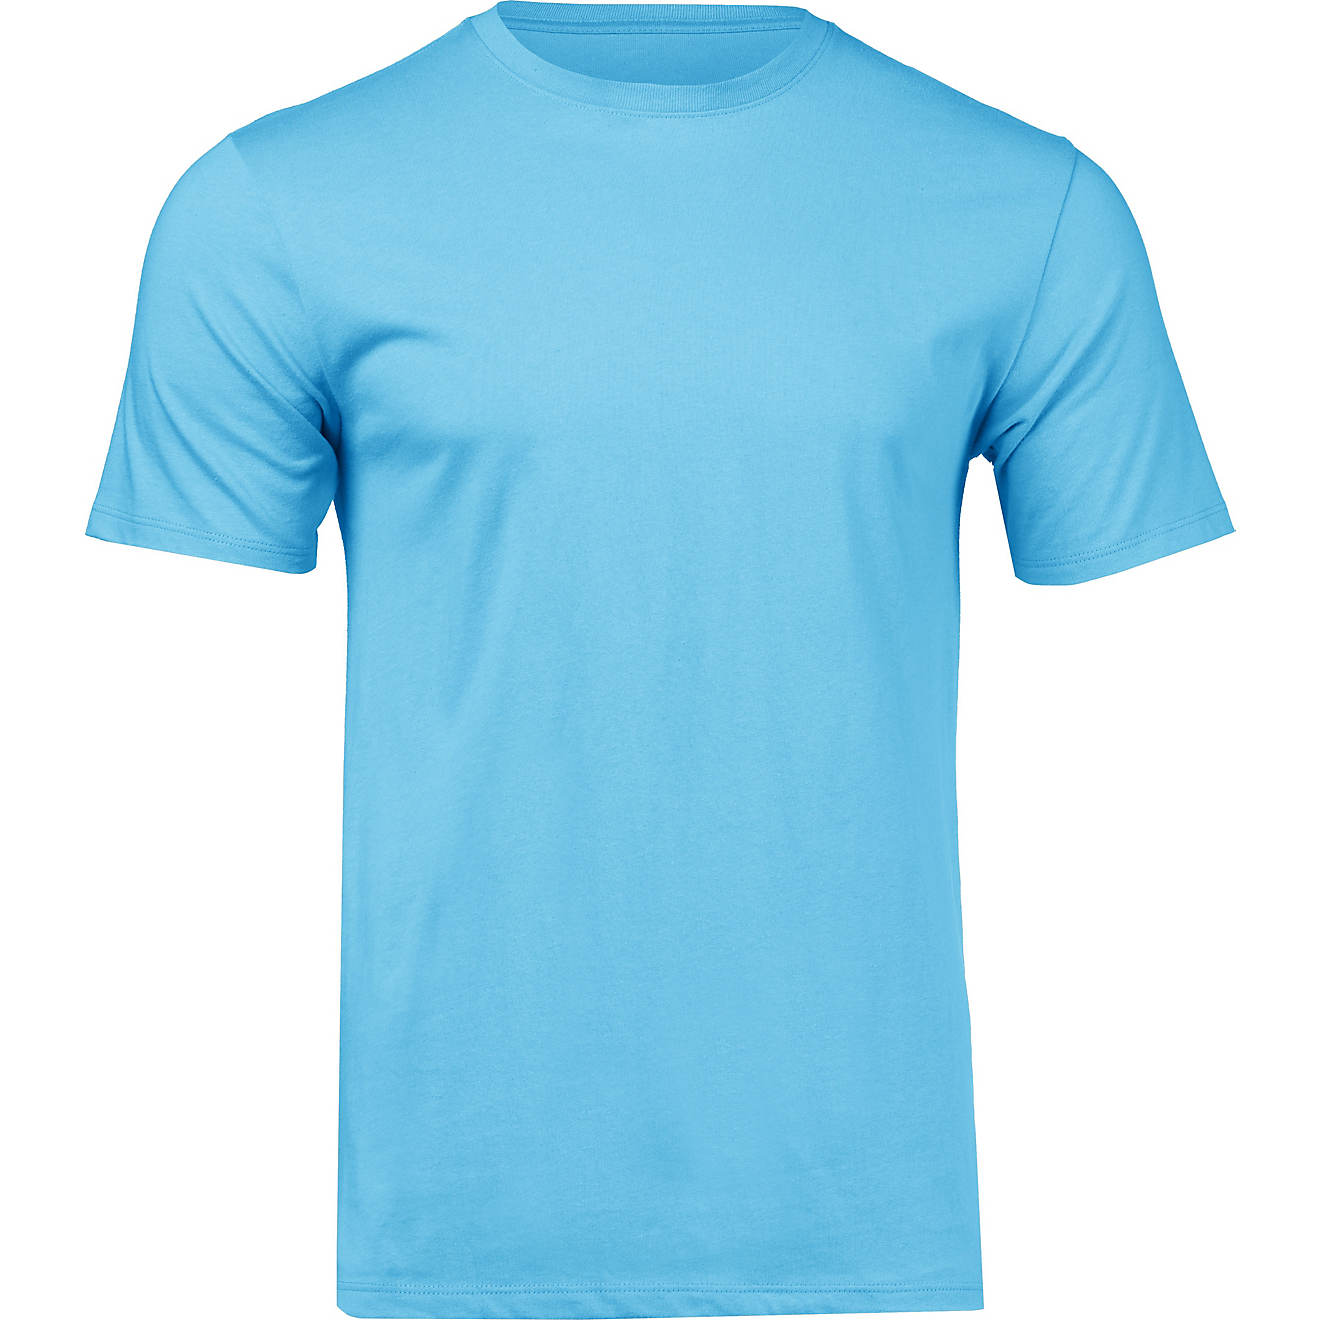 BCG Men's Styled Cotton Crew T-shirt | Academy